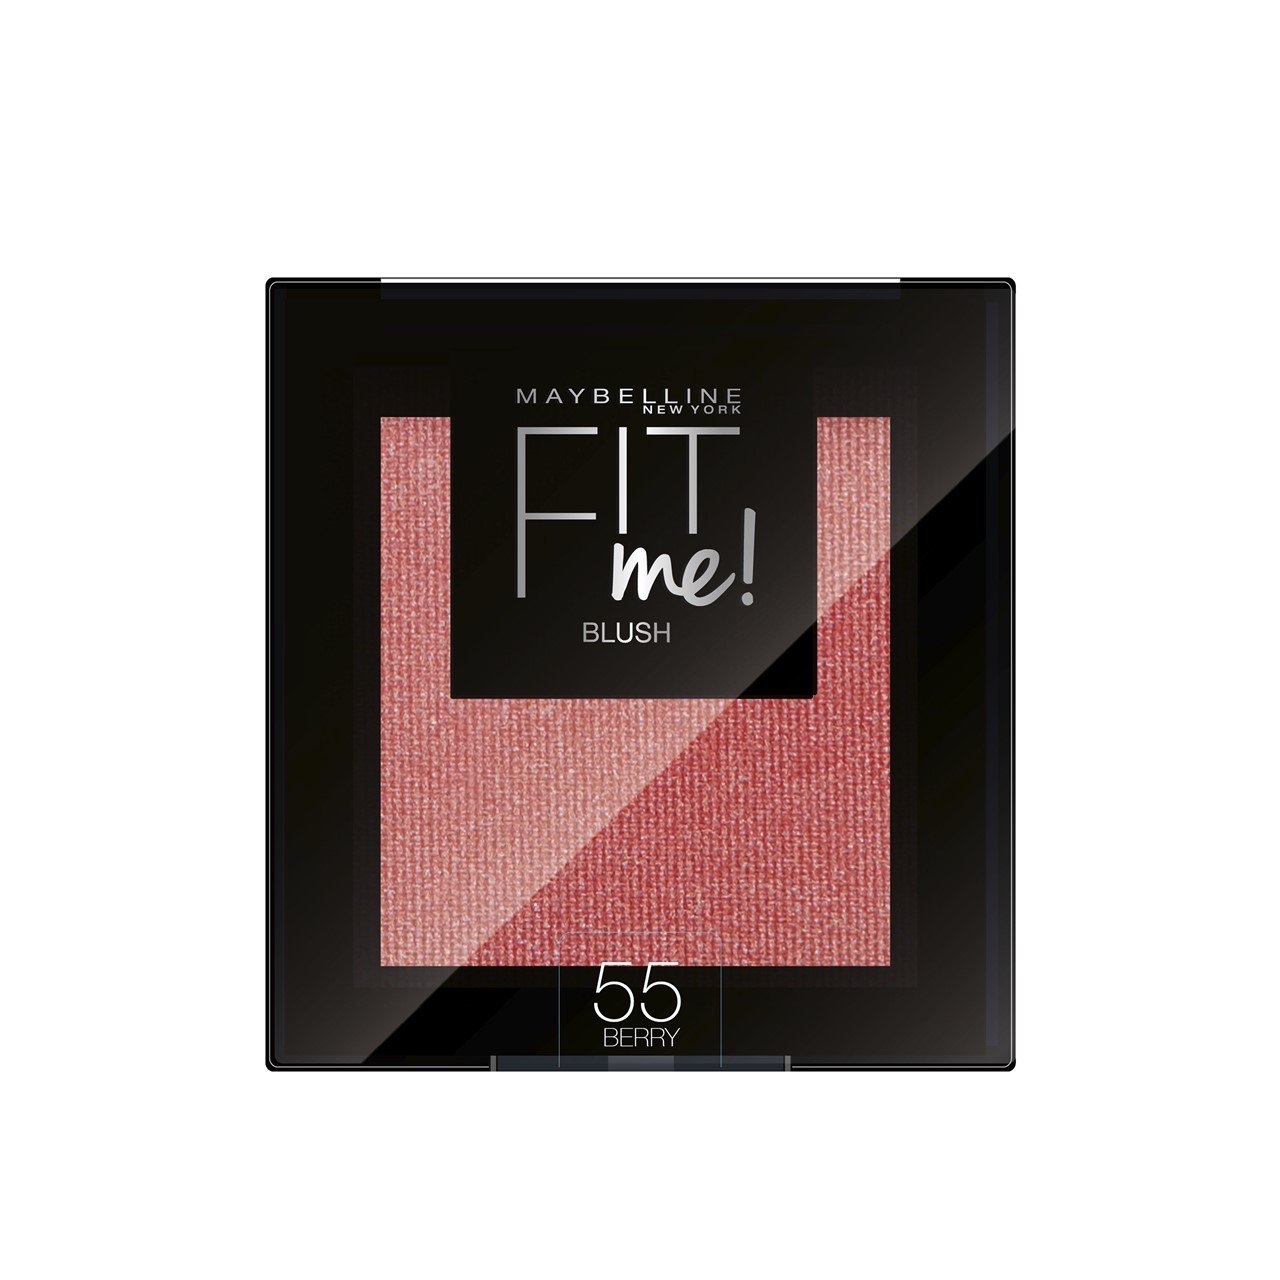 Maybelline Fit Me Blush 55 Berry 5g